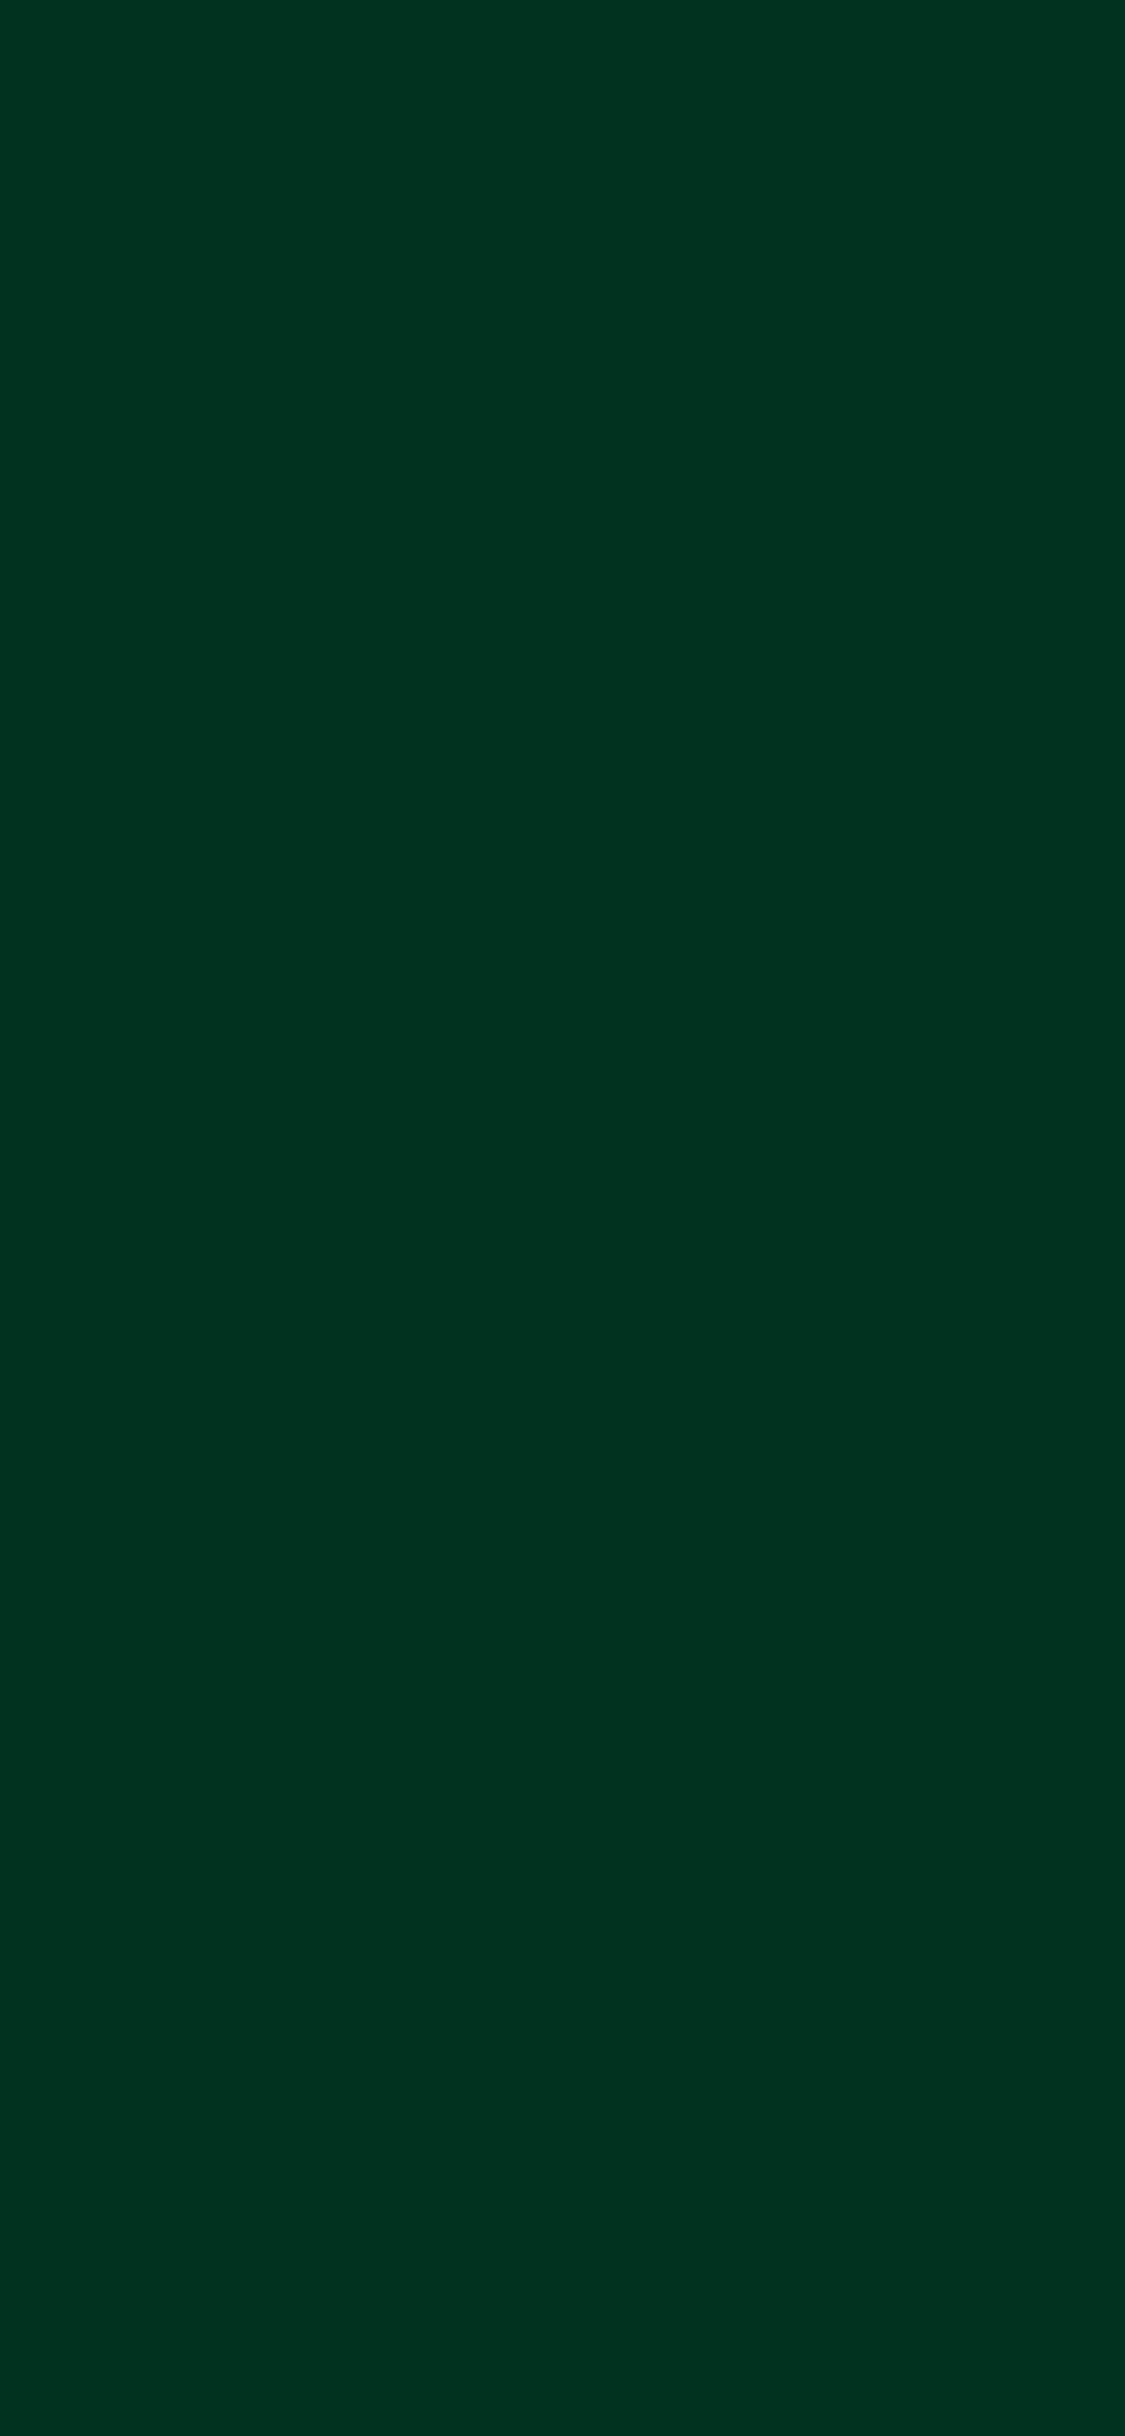 1125x2436 Dark Green Solid Color Background